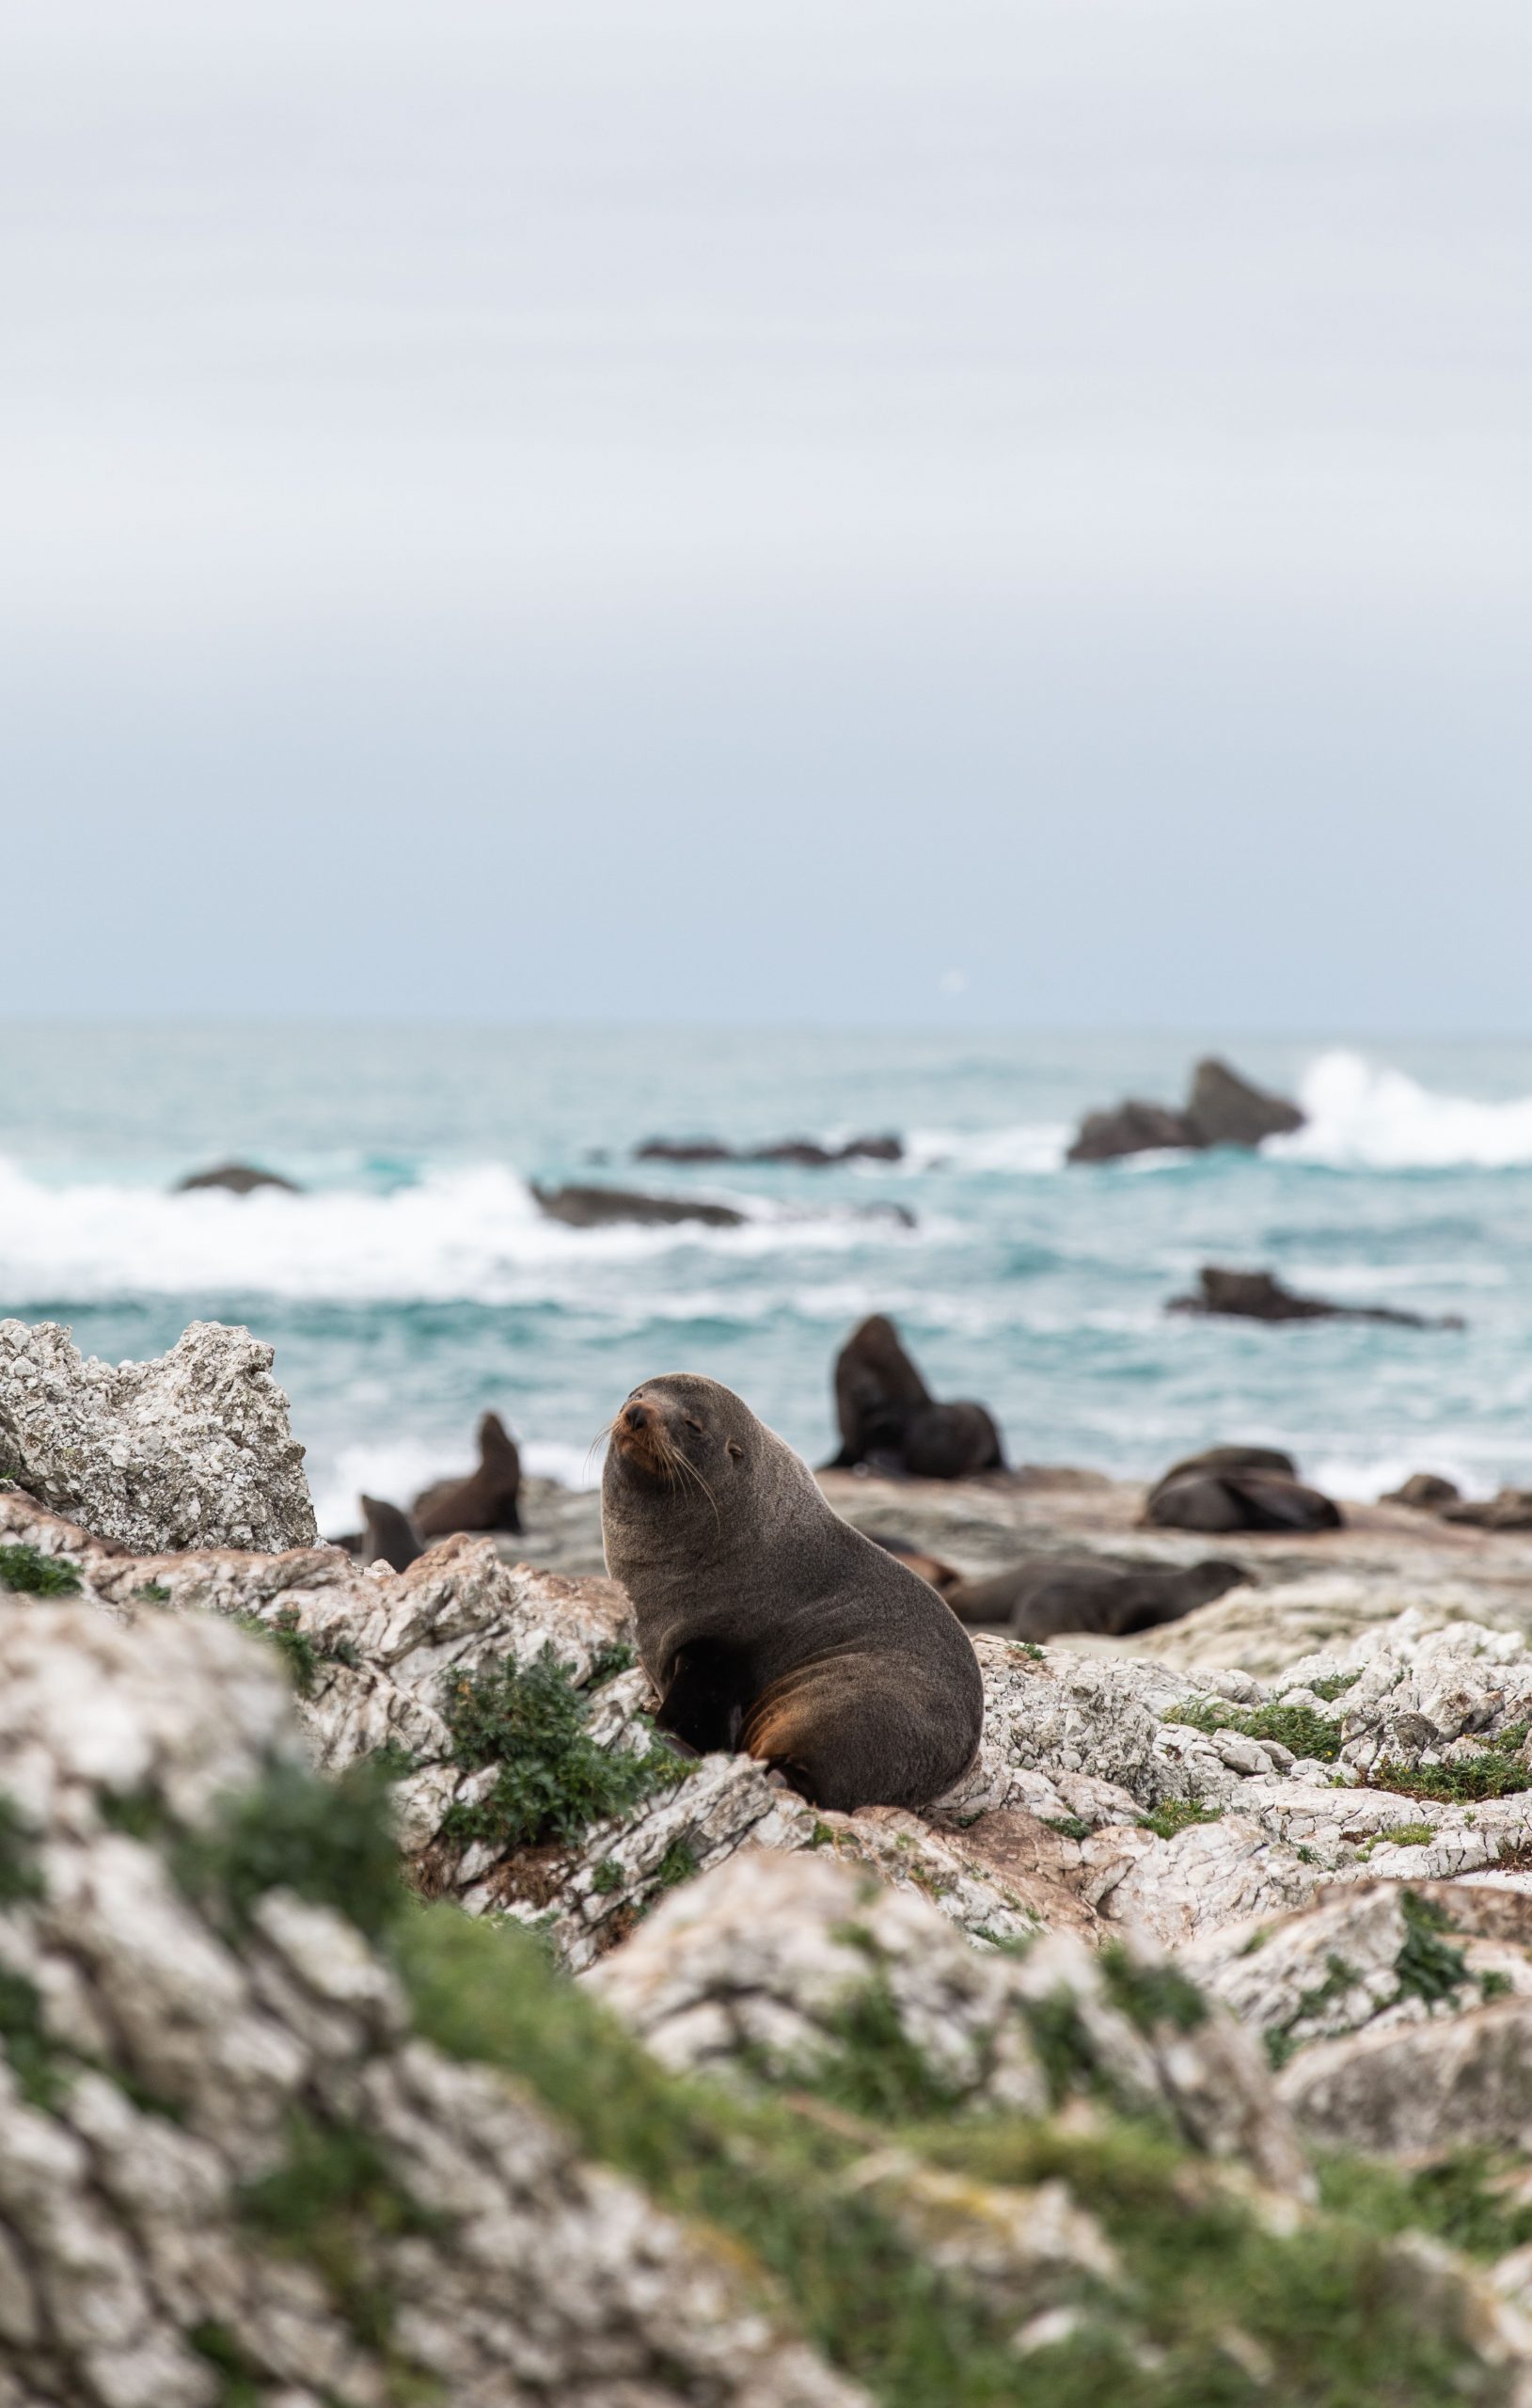 A fur seal looking at the camera perched on some rocks by the crashing waves of the ocean.